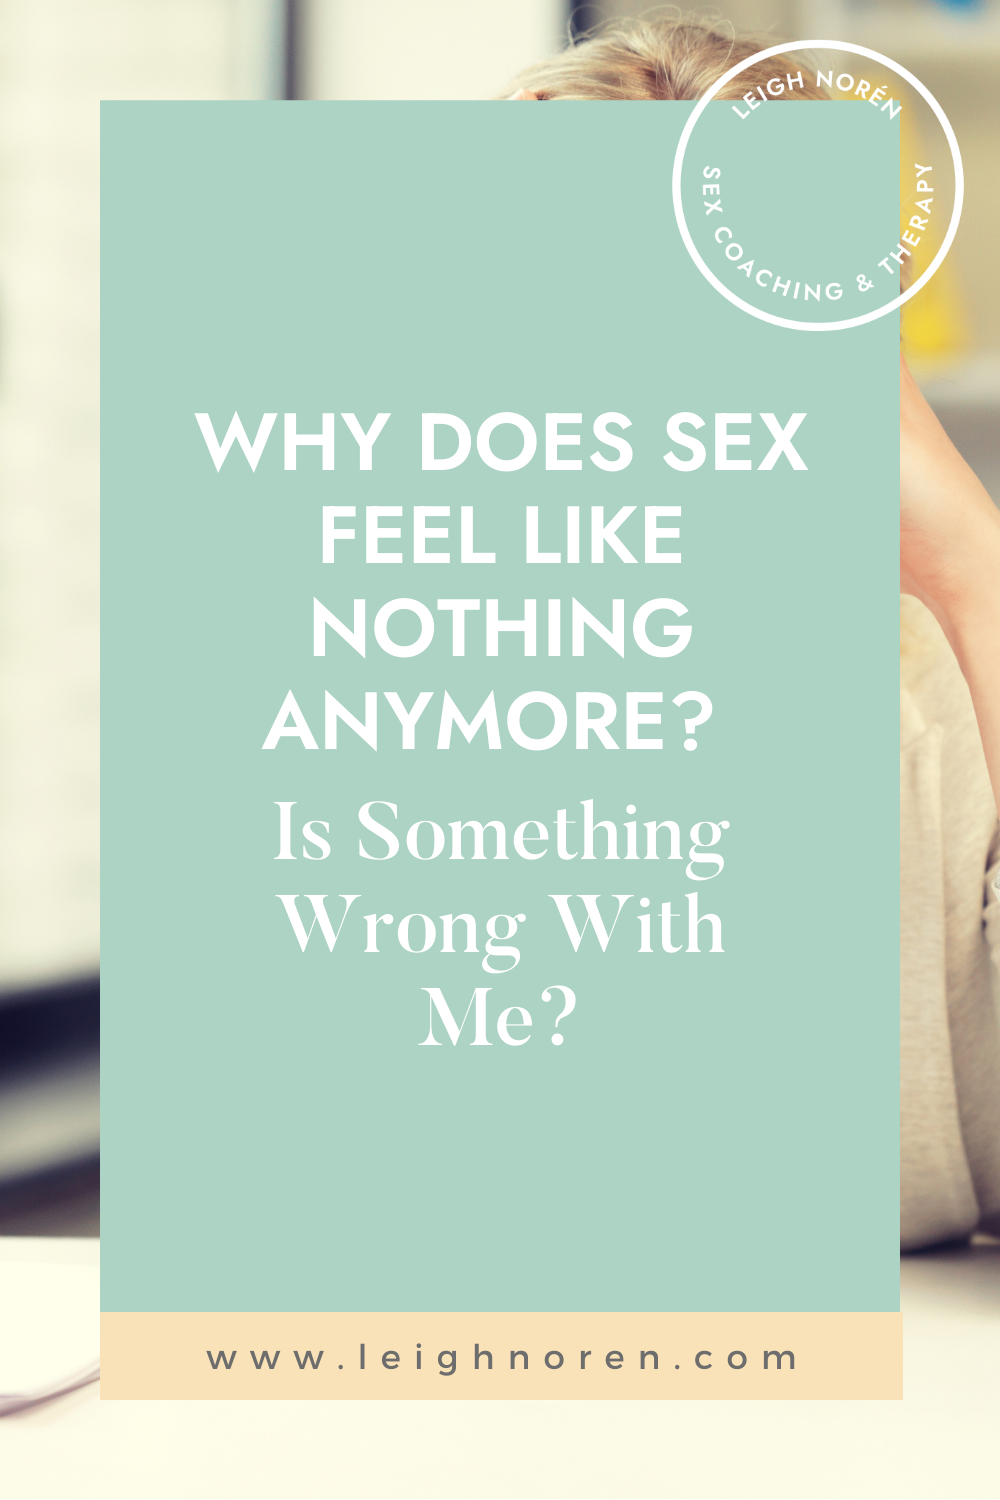 Why Does Sex Feel Like Nothing Anymore? Is Something Wrong With Me?